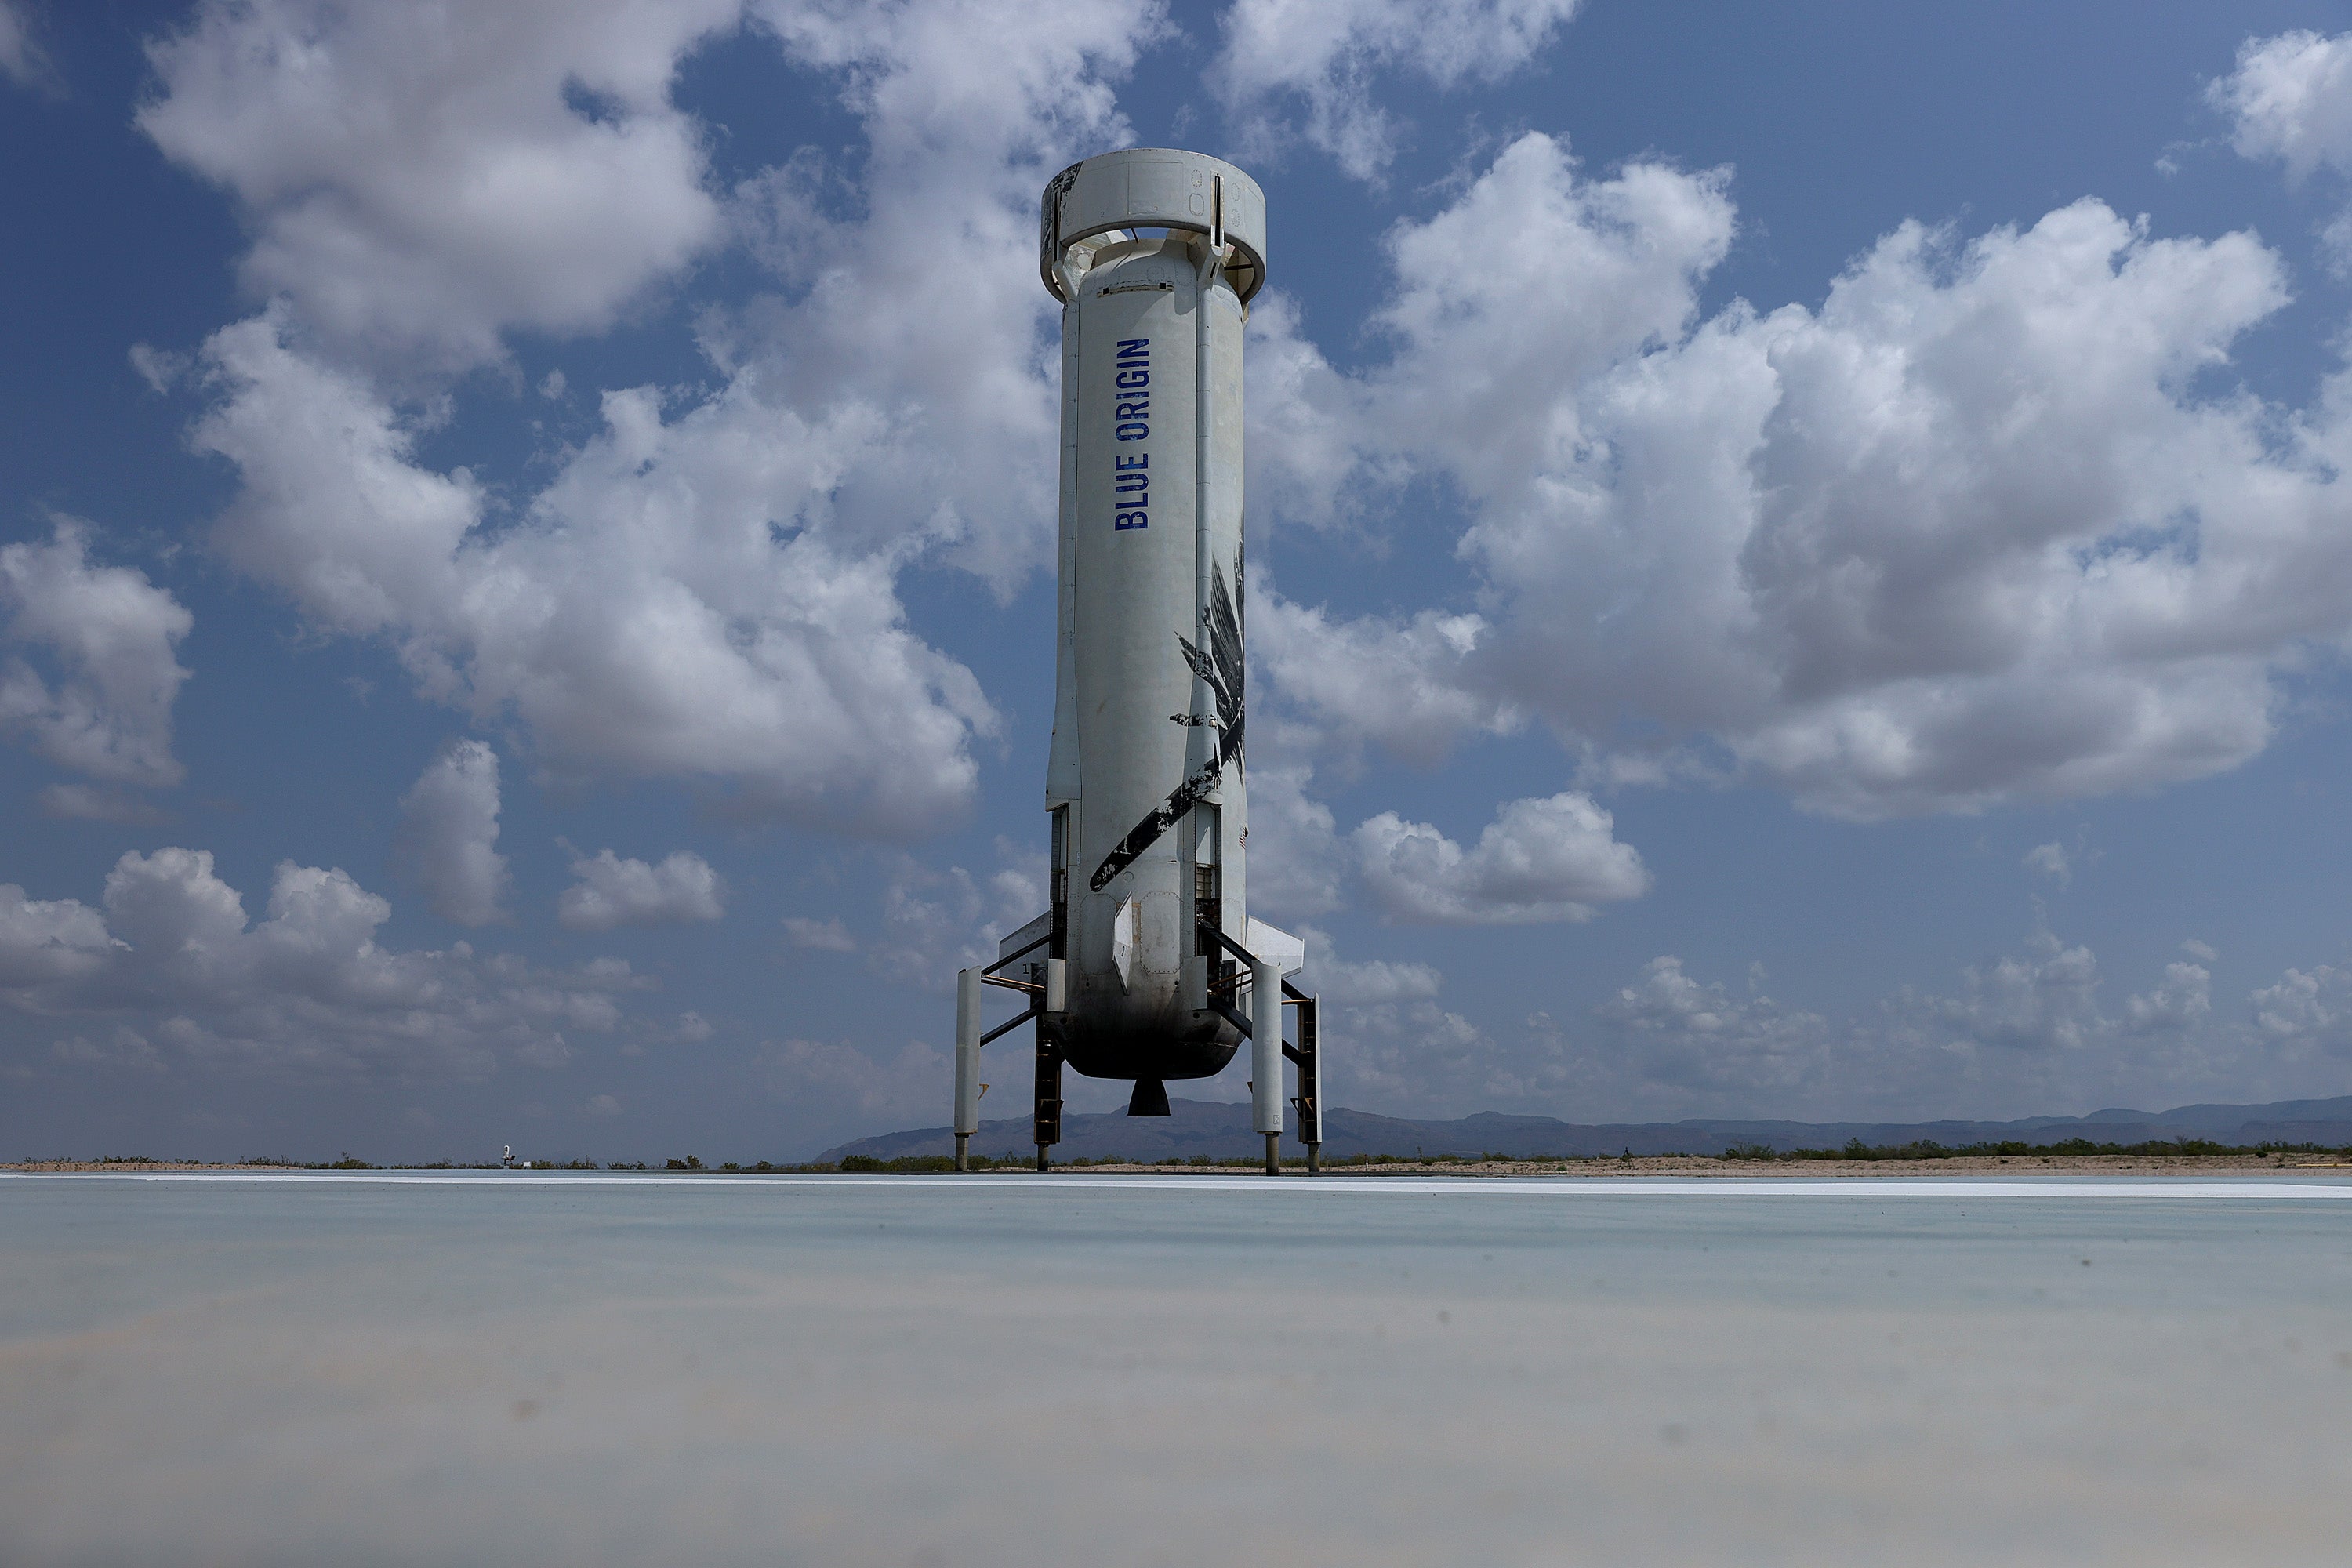 The booster for Blue Origin’s New Shepard sits on the landing pad after powering the rocket into space on July 20, 2021 in Van Horn, Texas